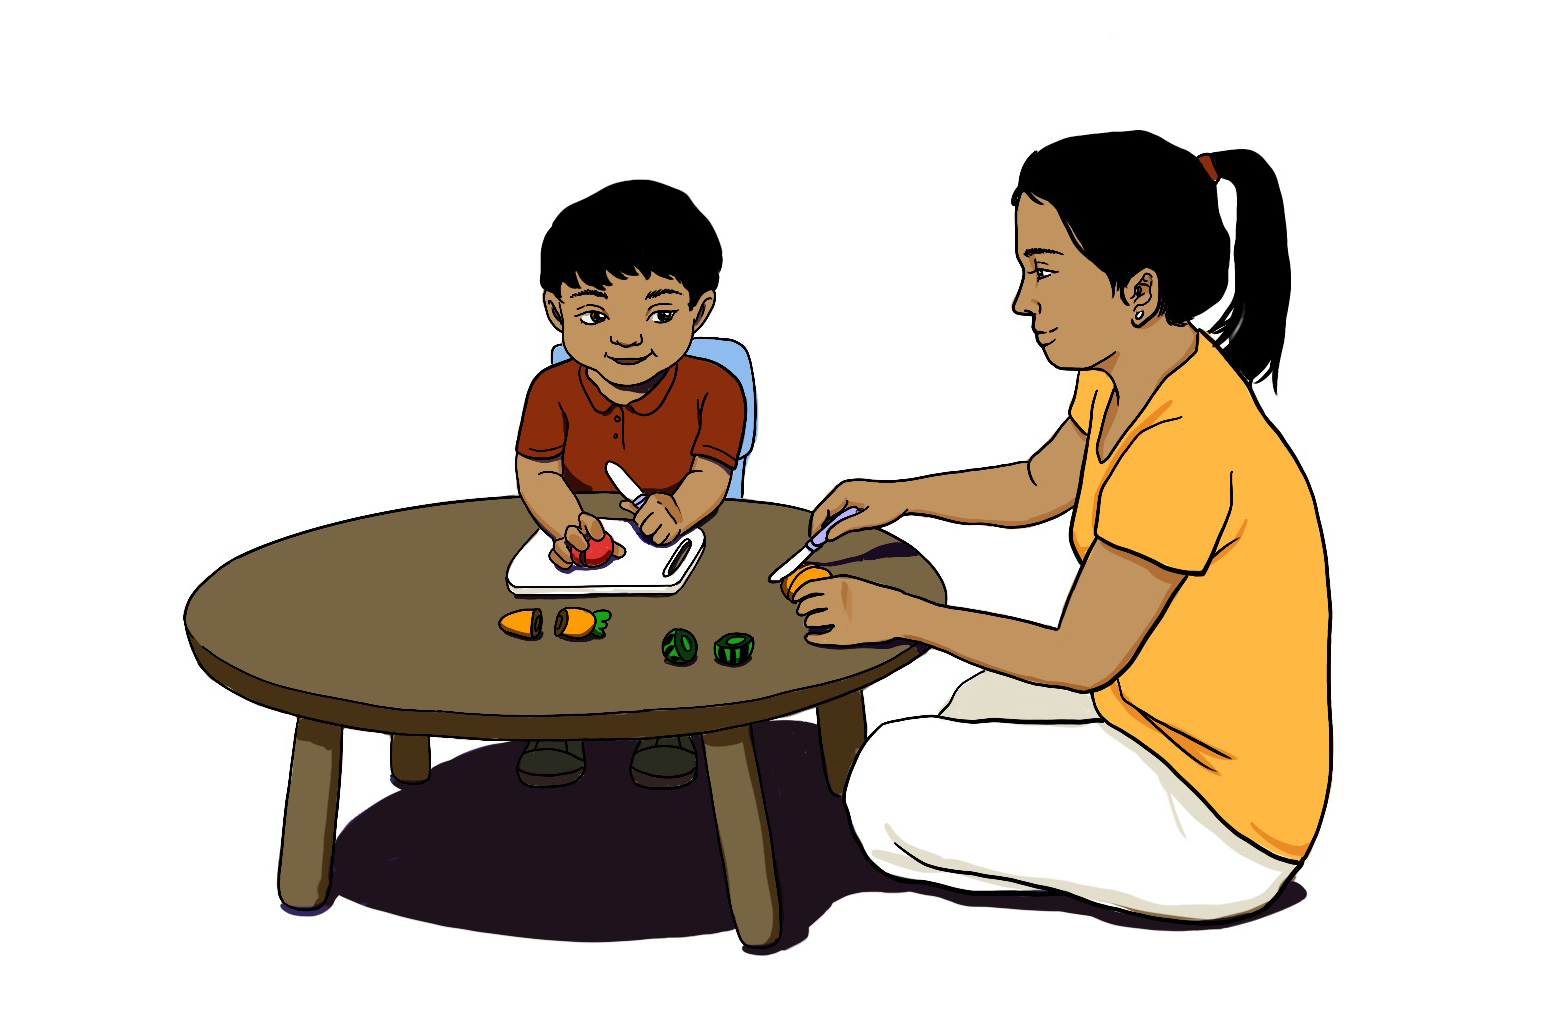 Mother cutting vegetables with young child using child-friendly utensils.